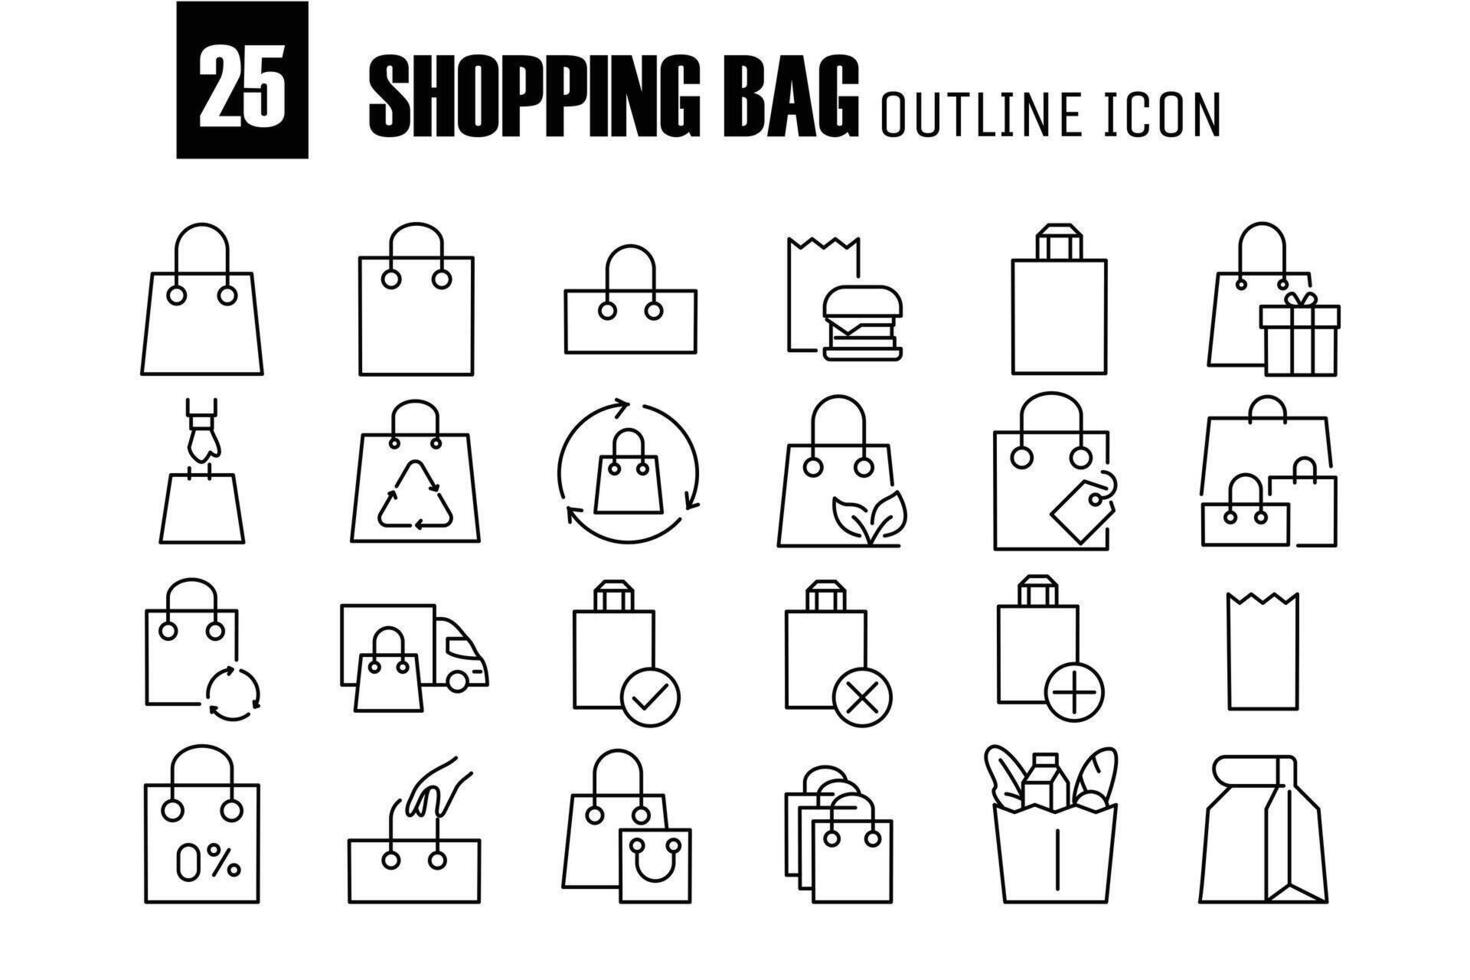 Shopping Bag Related Vector ouline Icons. vector icon for website and mobile app